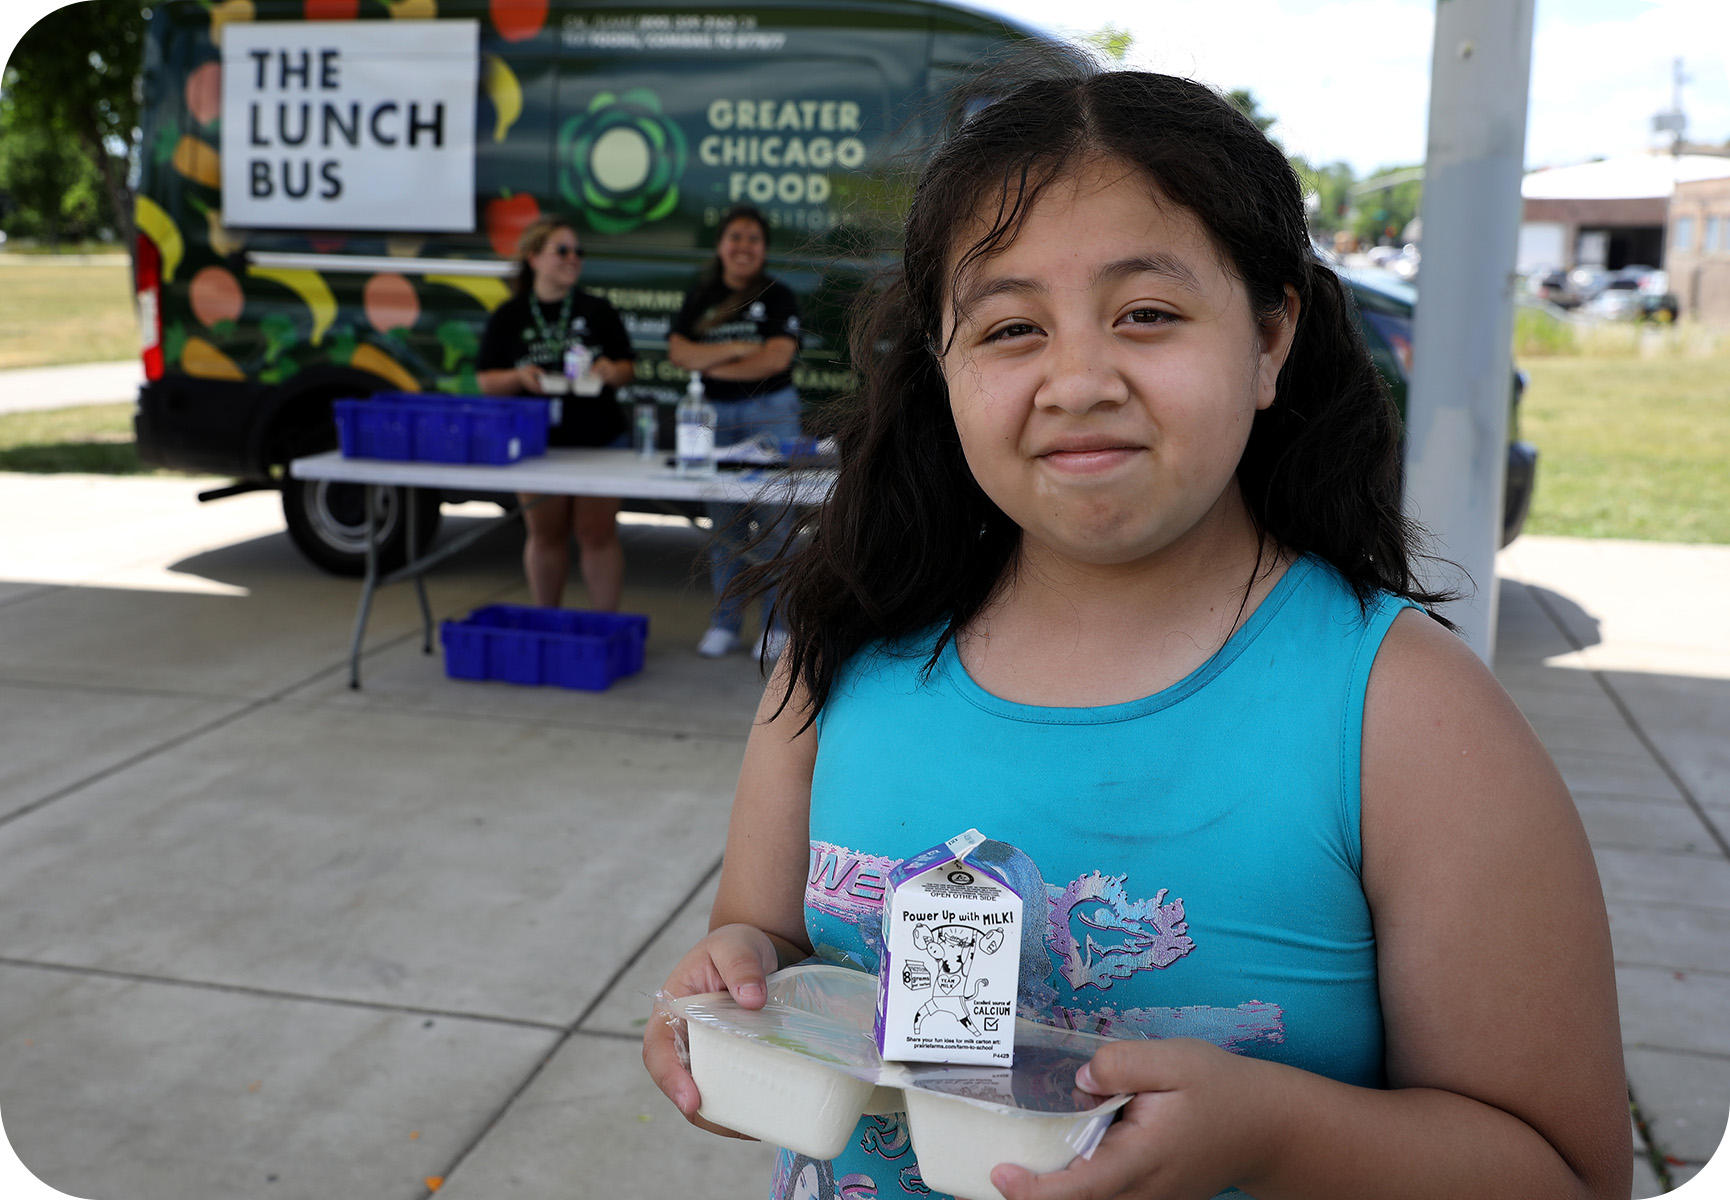 A child received her nutritious lunch provided by the Greater Chicago Food Depository Lunch Bus.